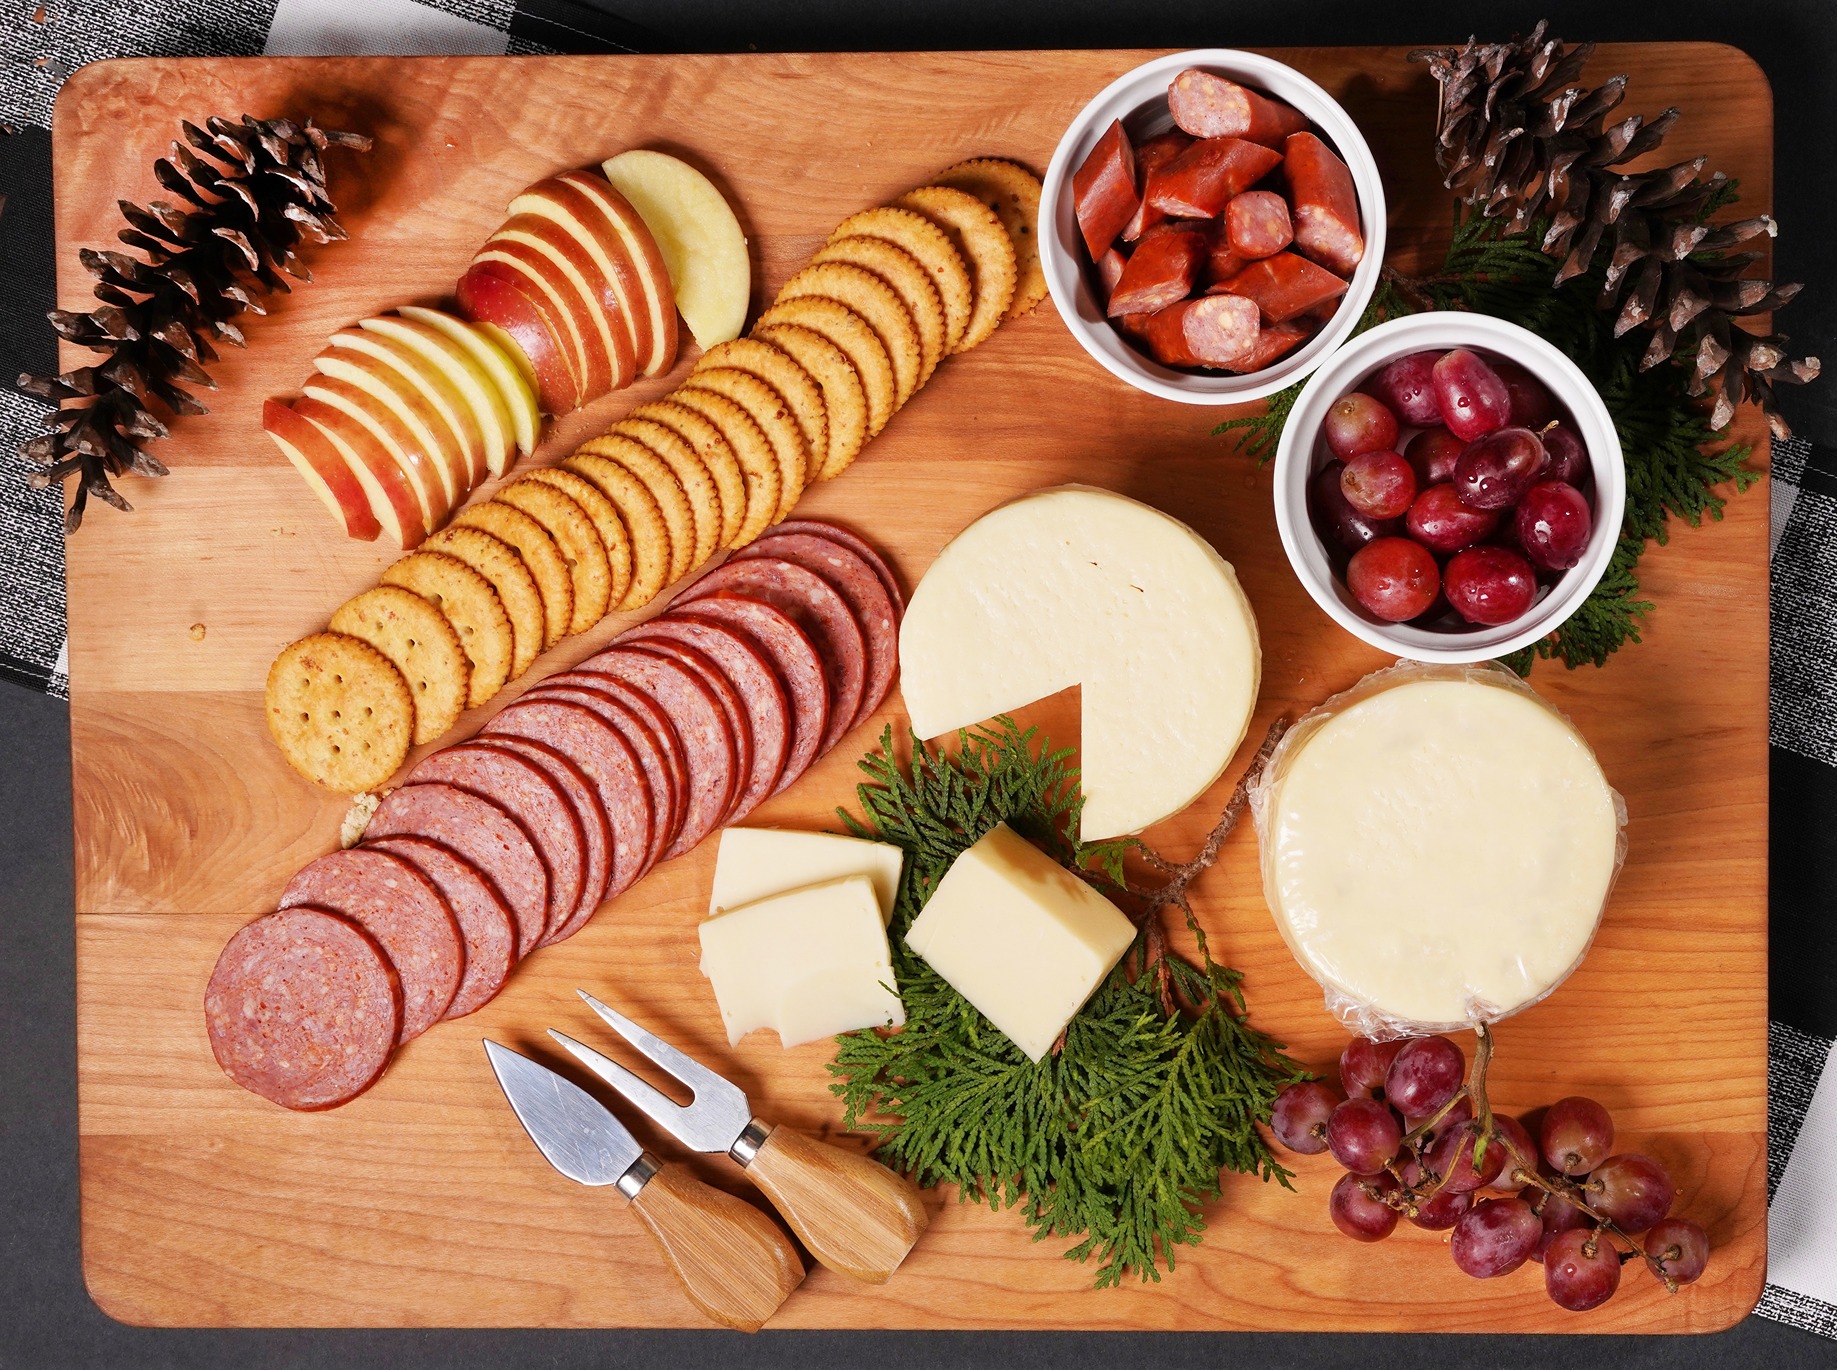 Cuts of salami and sausage are paired with other items on a charcuterie board.